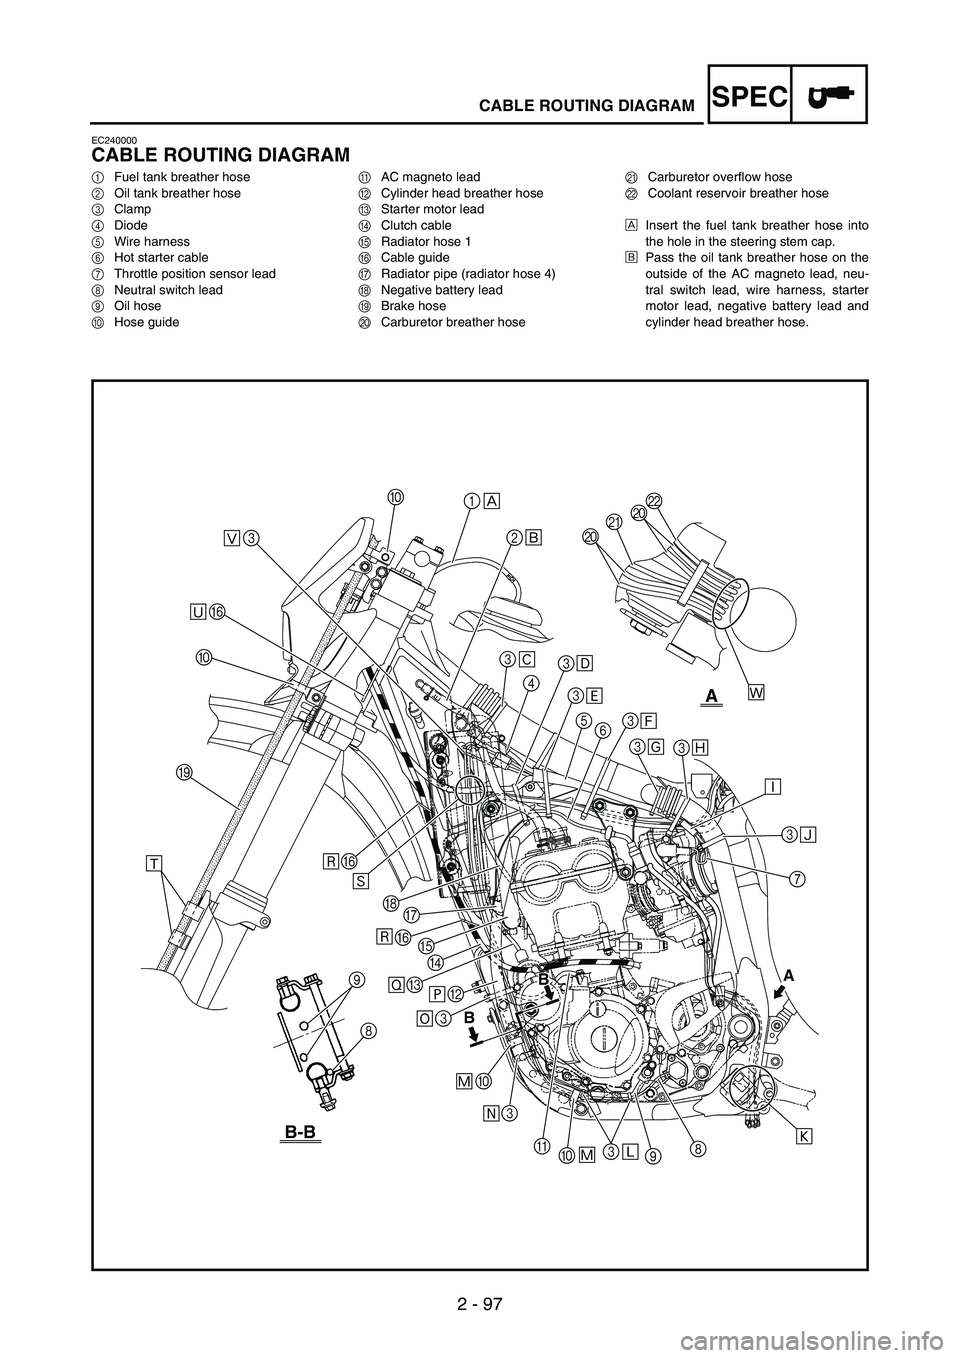 YAMAHA WR 250F 2004  Manuale de Empleo (in Spanish) SPEC
2 - 97
CABLE ROUTING DIAGRAM
EC240000
CABLE ROUTING DIAGRAM
1Fuel tank breather hose
2Oil tank breather hose
3Clamp
4Diode
5Wire harness
6Hot starter cable
7Throttle position sensor lead
8Neutral